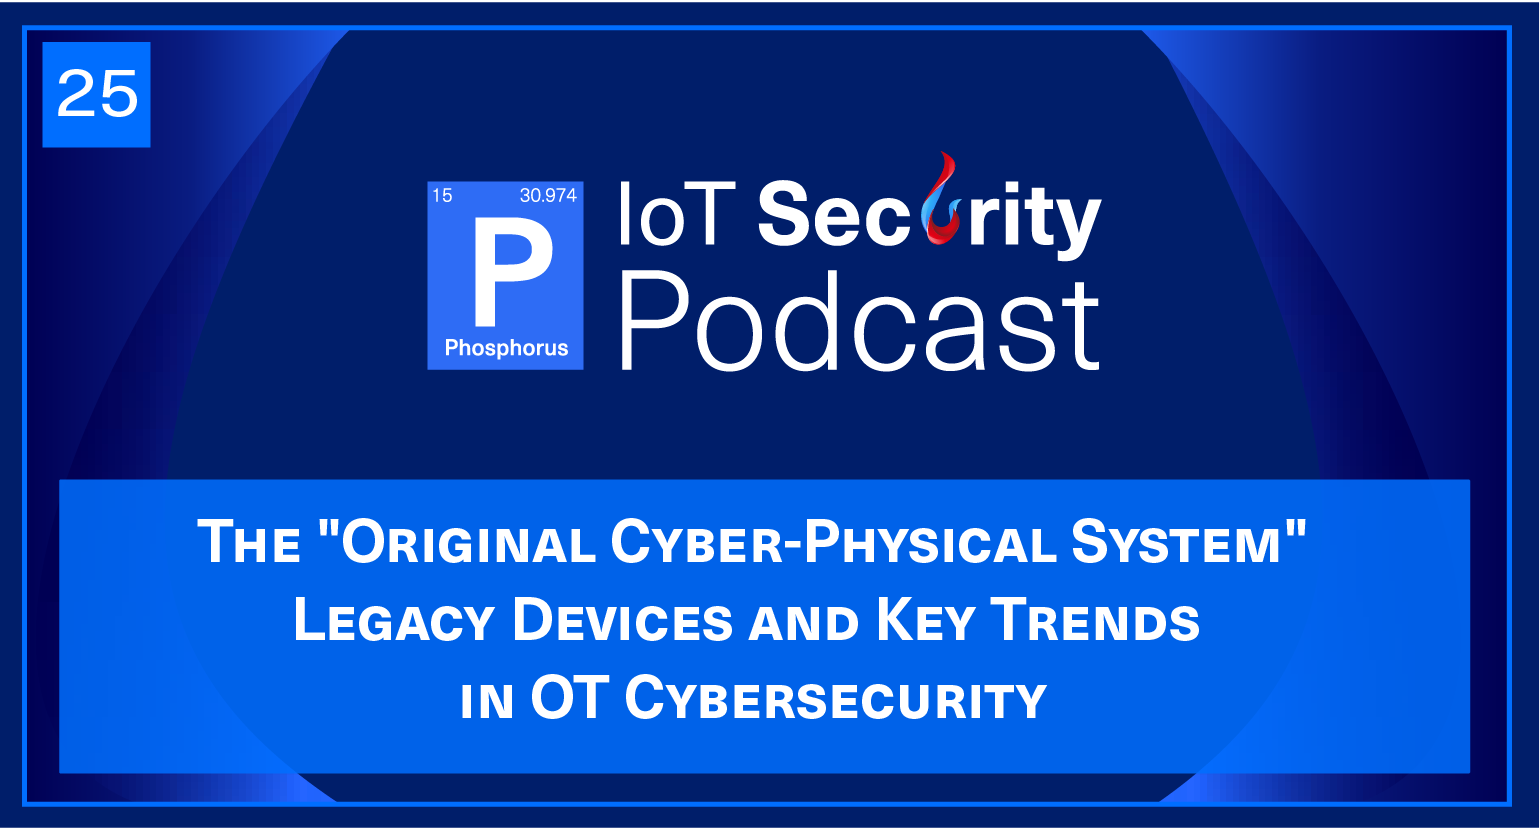 The "Original Cyber-Physical System": Legacy Devices and Key Trends in OT Cybersecurity